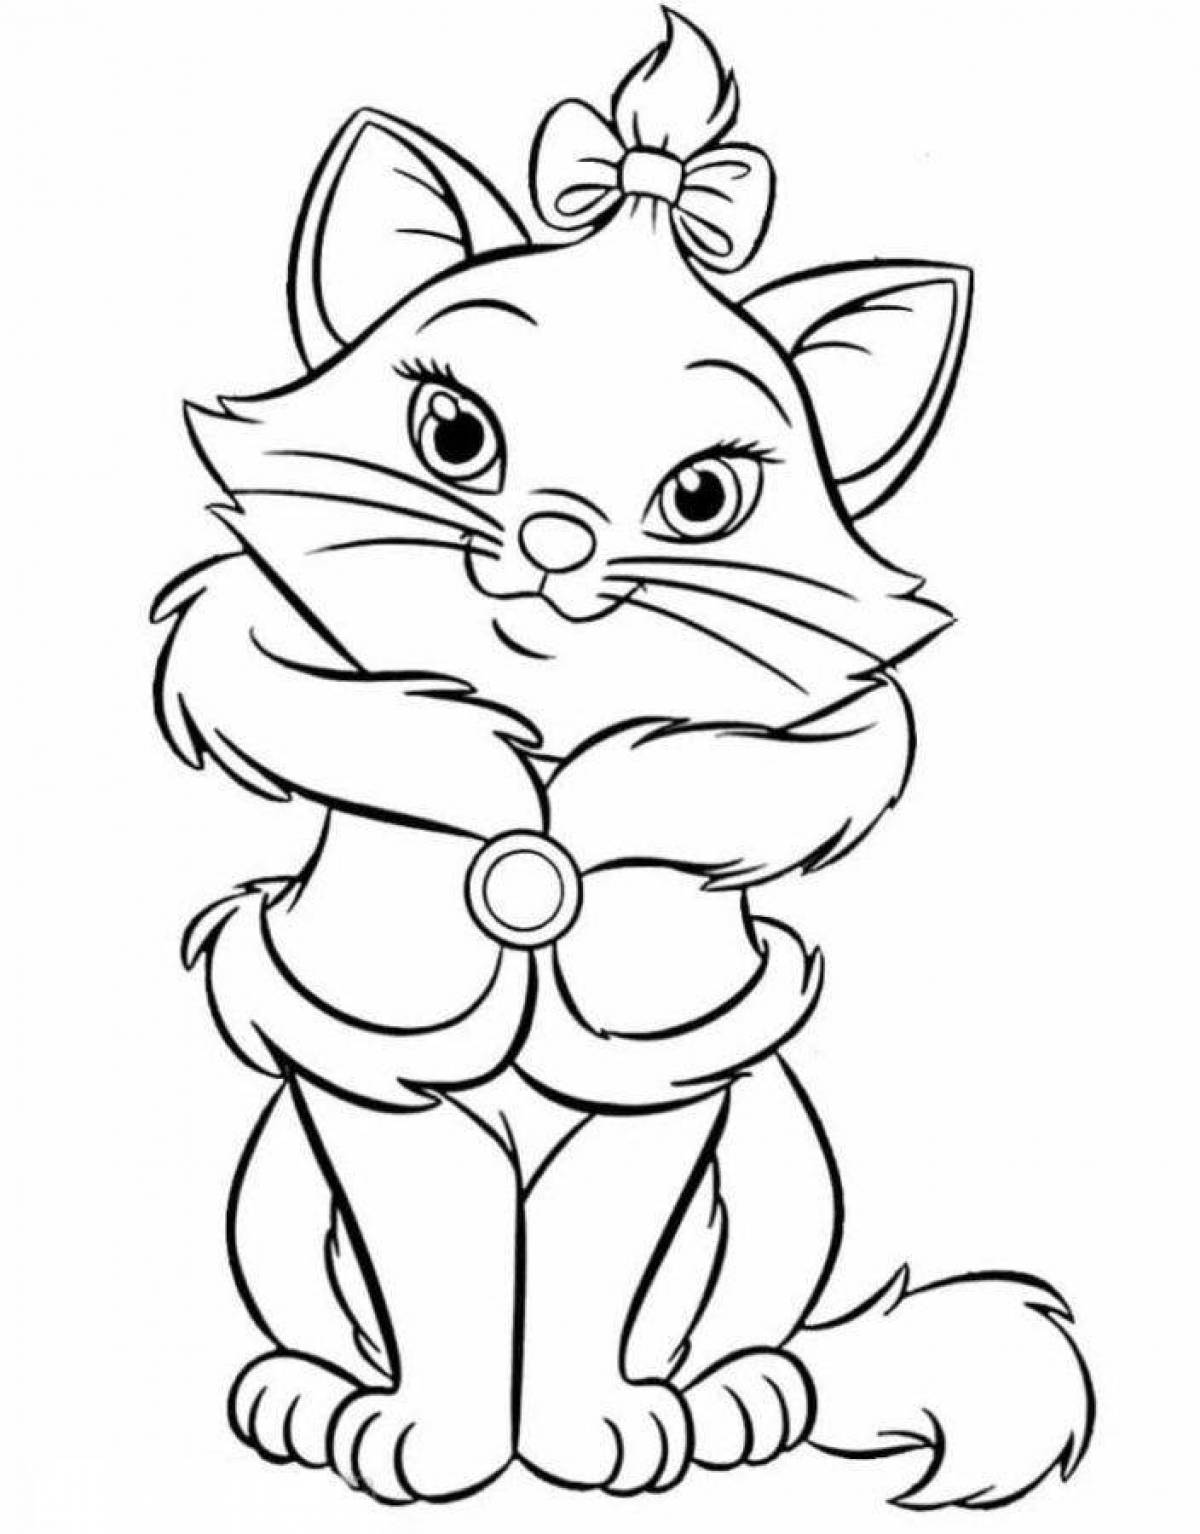 Coloring page tiny kitten with a bow